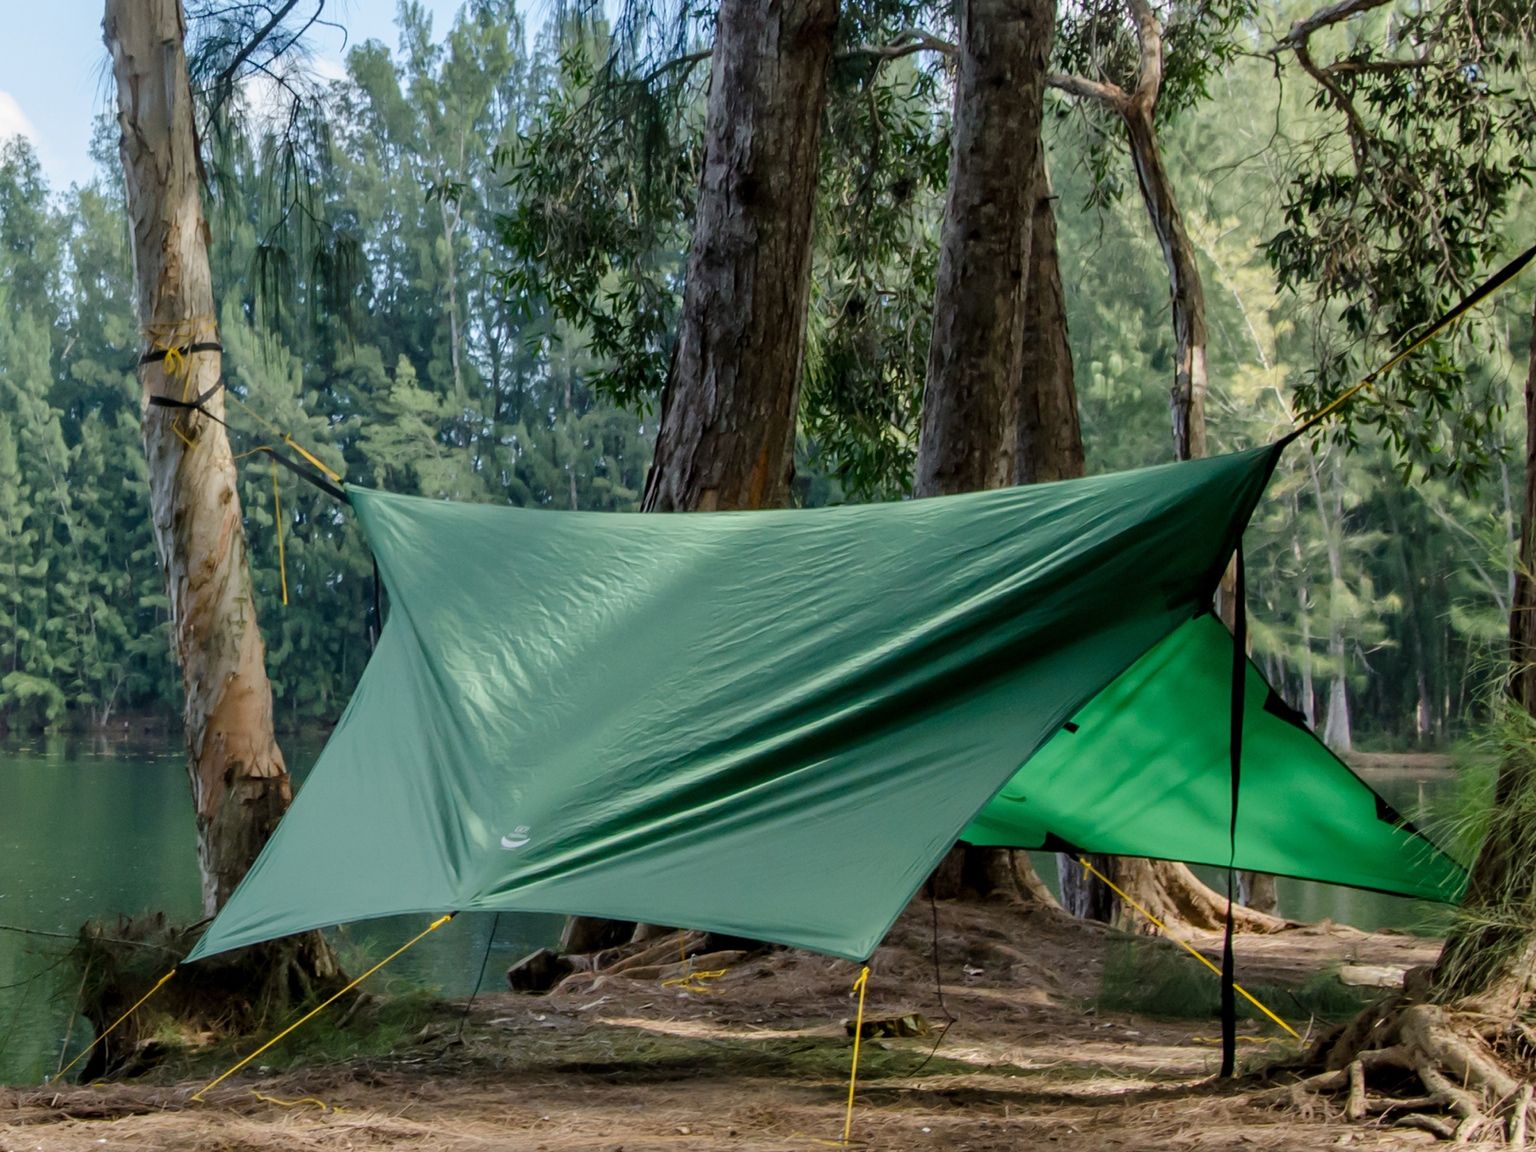 How to Protect Your Belongings from Any Weather with Tarpaulins